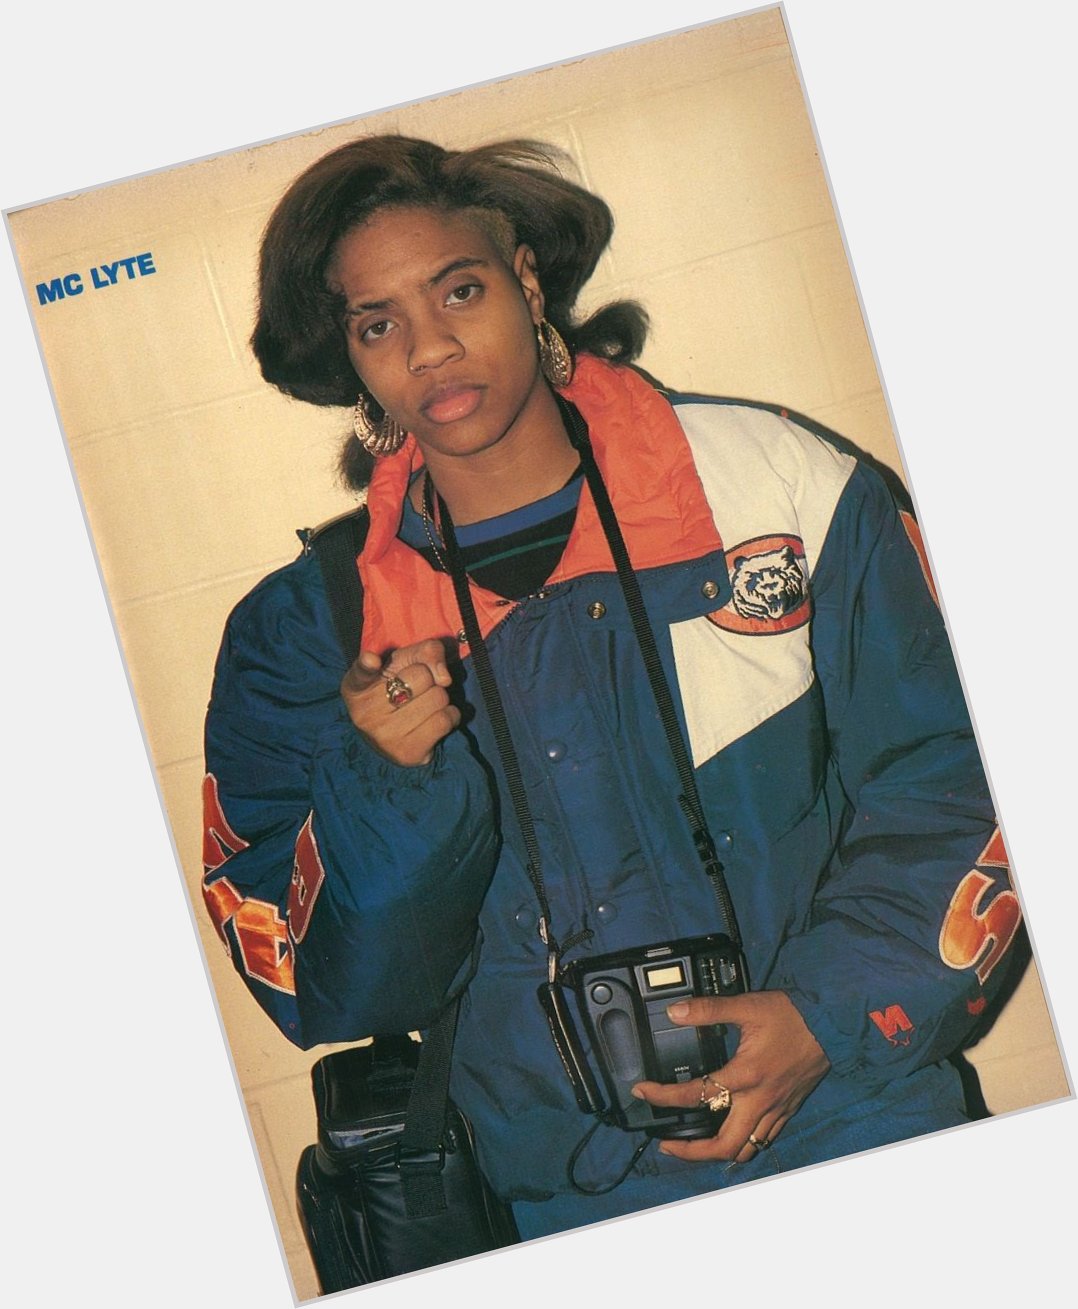 Happy 50th birthday to the Queen of HipHop MC LYTE 